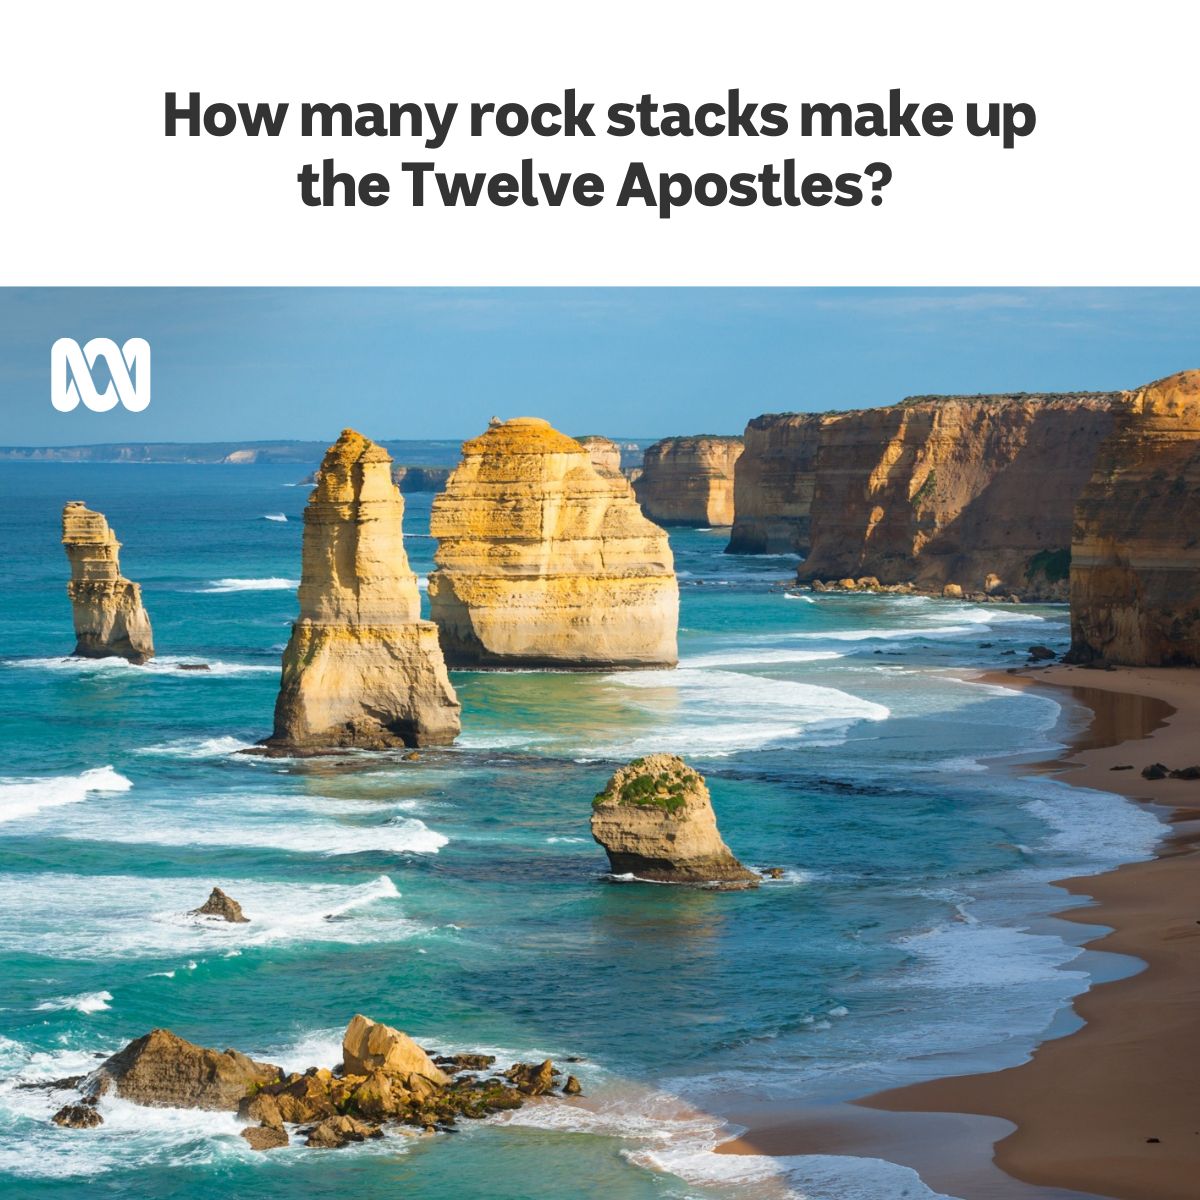 #Geography #teachers, this is for you! The #TwelveApostles is a great example of how dynamic our coastlines are. Do you know how many rock stacks make up this iconic landform?